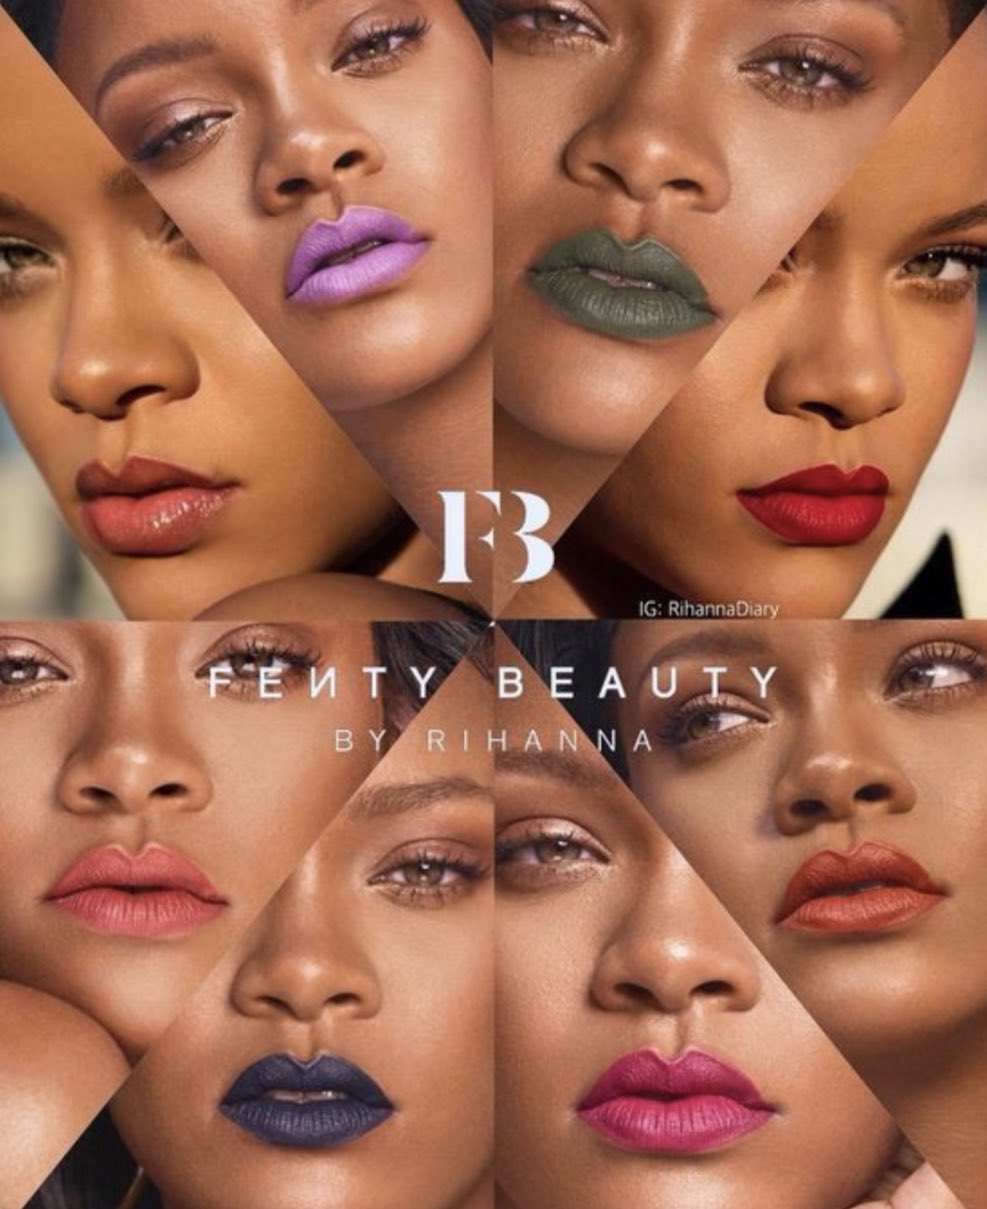 Kgopolo on X: BRANDS: Edgar's partners with Rihanna's Fenty Beaty Rihanna  will launch her FENTY BEAUTY & FENTY SKIN brand in Africa this month.  Edgar's Beauty has inked a deal to be